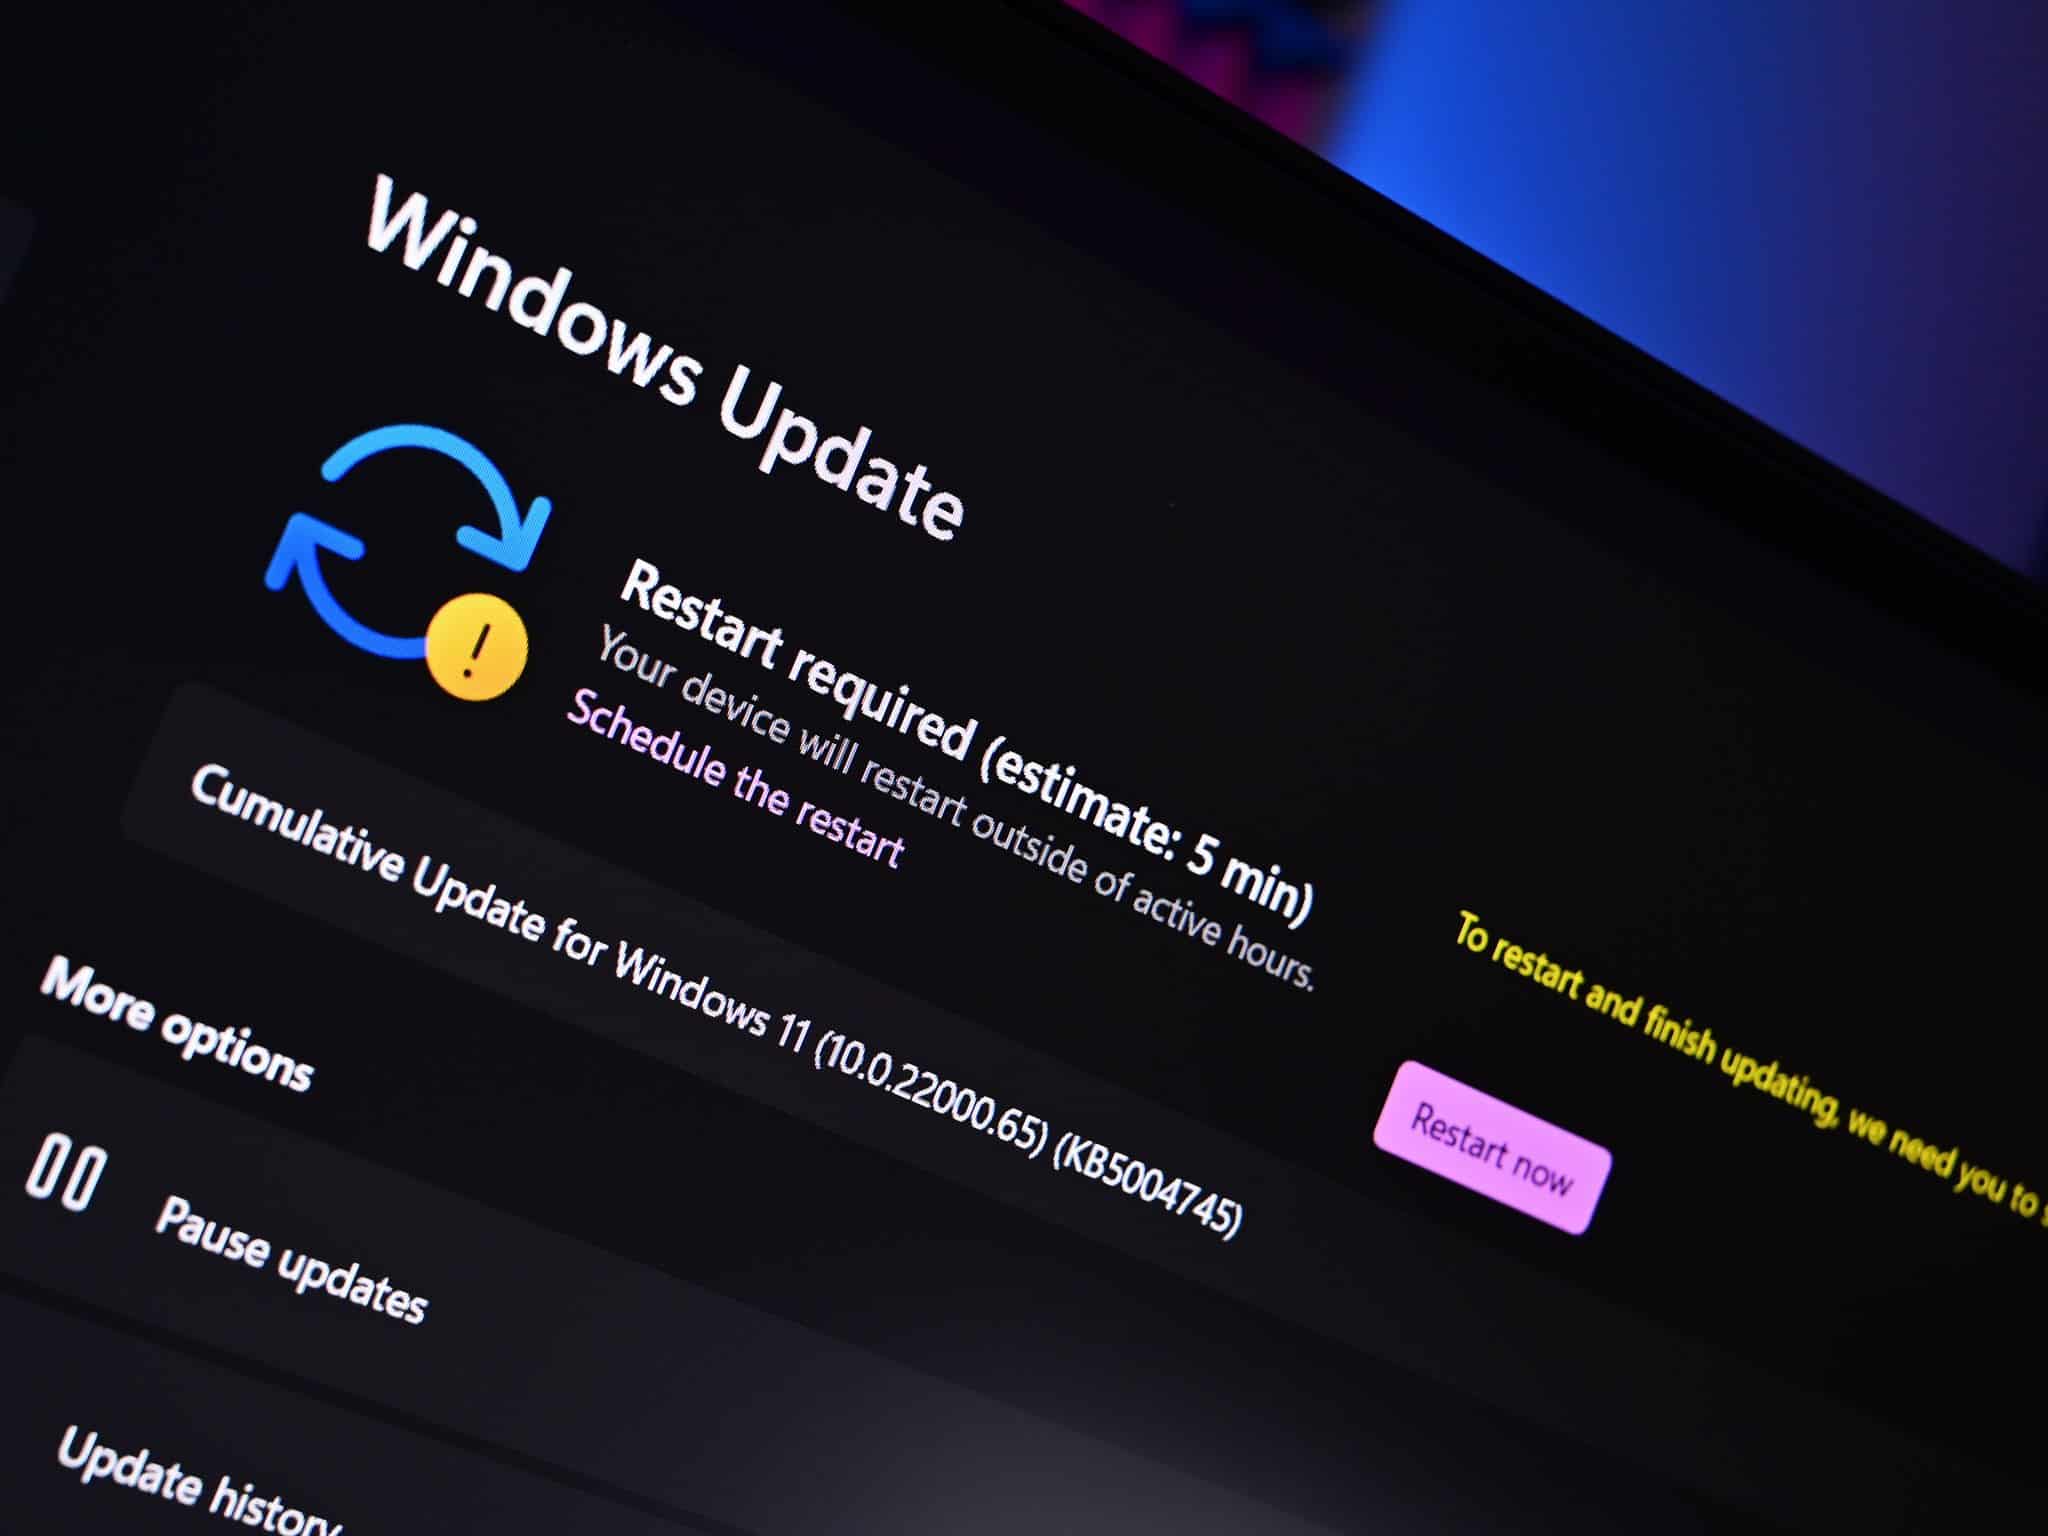 Cumulative Update For Windows 10 Version 1511 For X64-Based Systems (KB3147458)